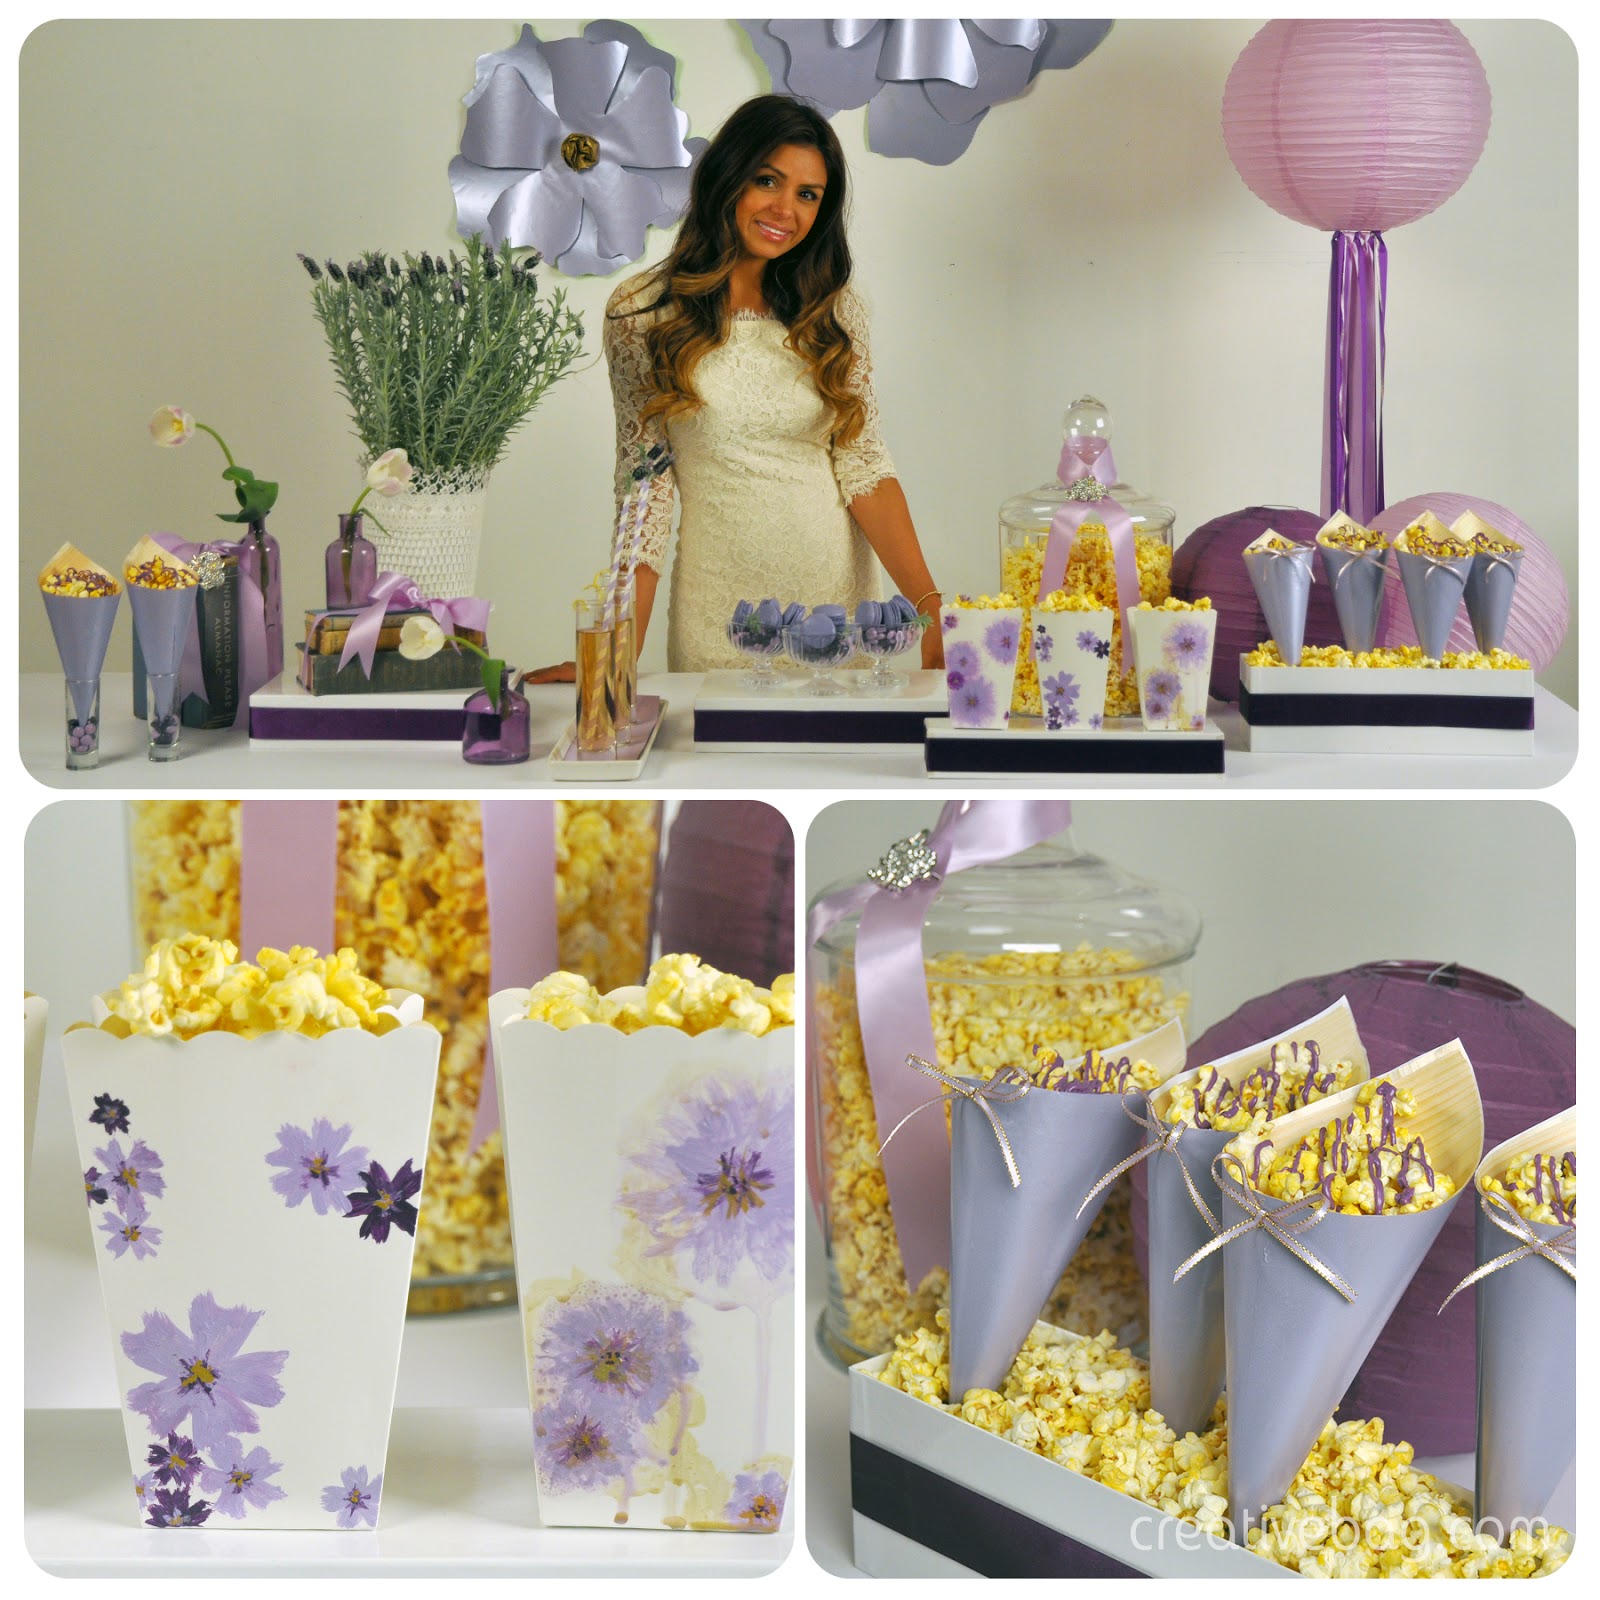 popcorn sweet table on YouTube - pretty grown up lavender theme